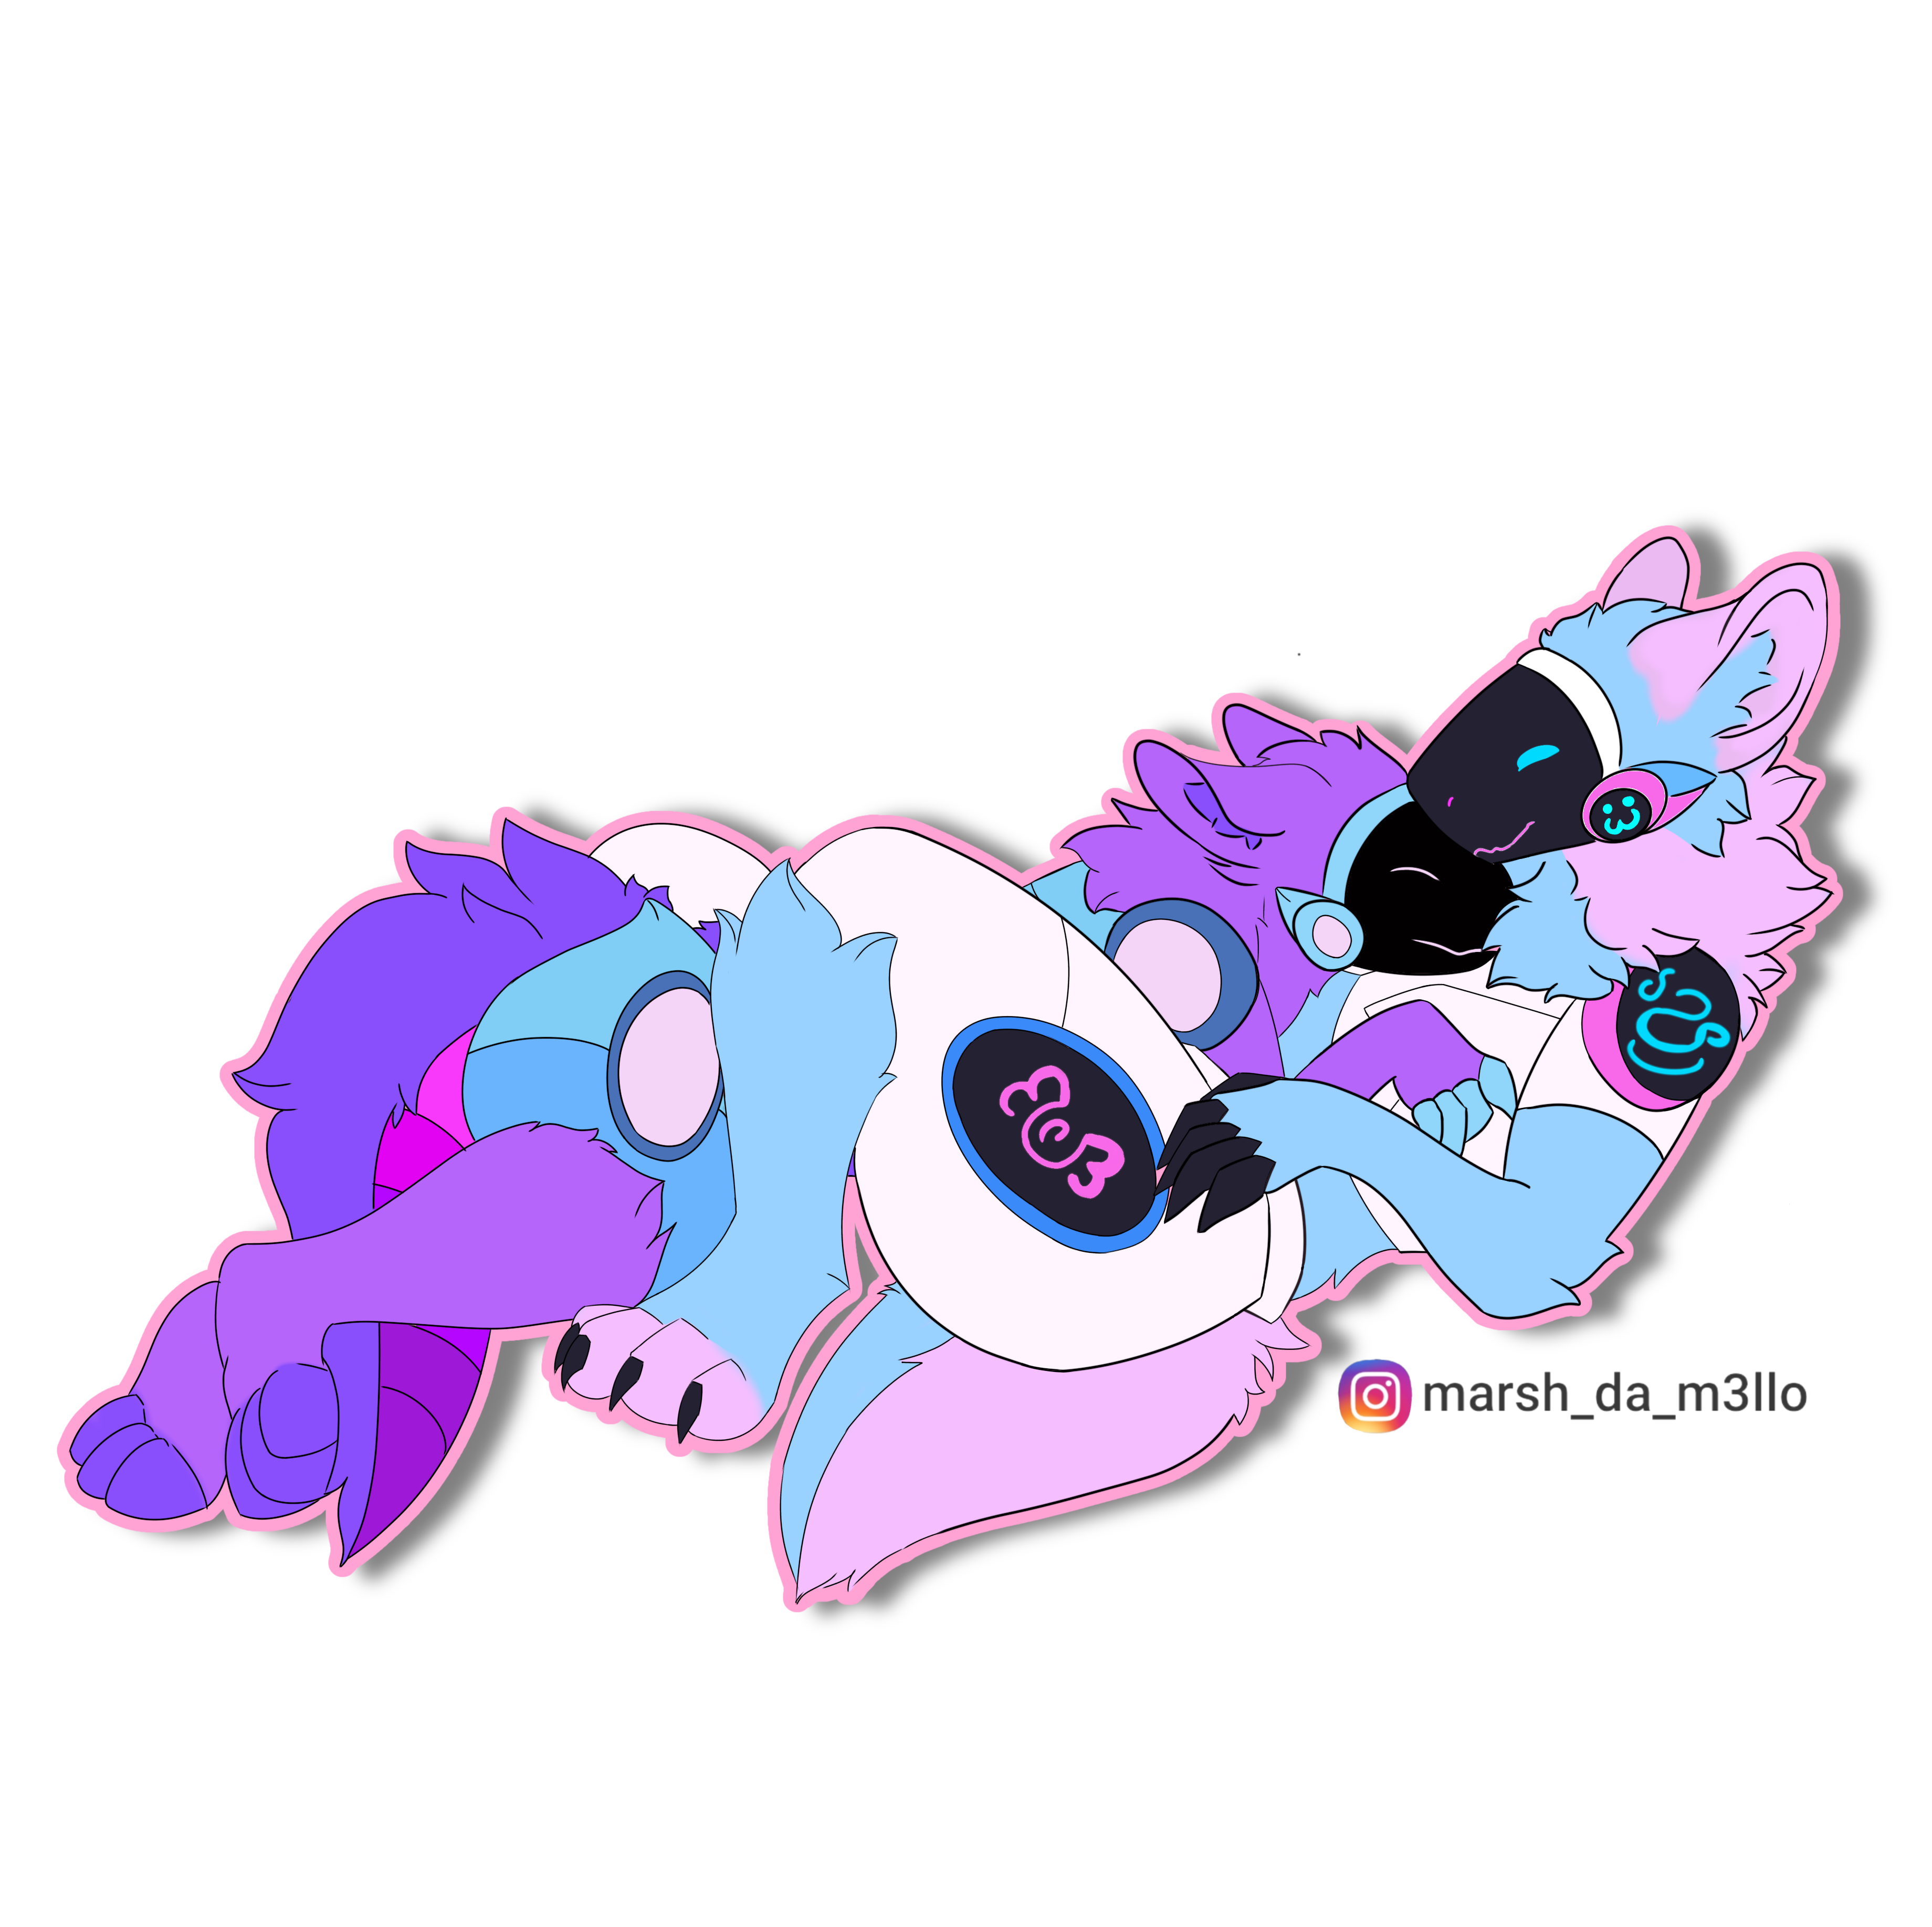 More Cute Cuddly Protogens 💜 ych still open! 💜 all art by me : r